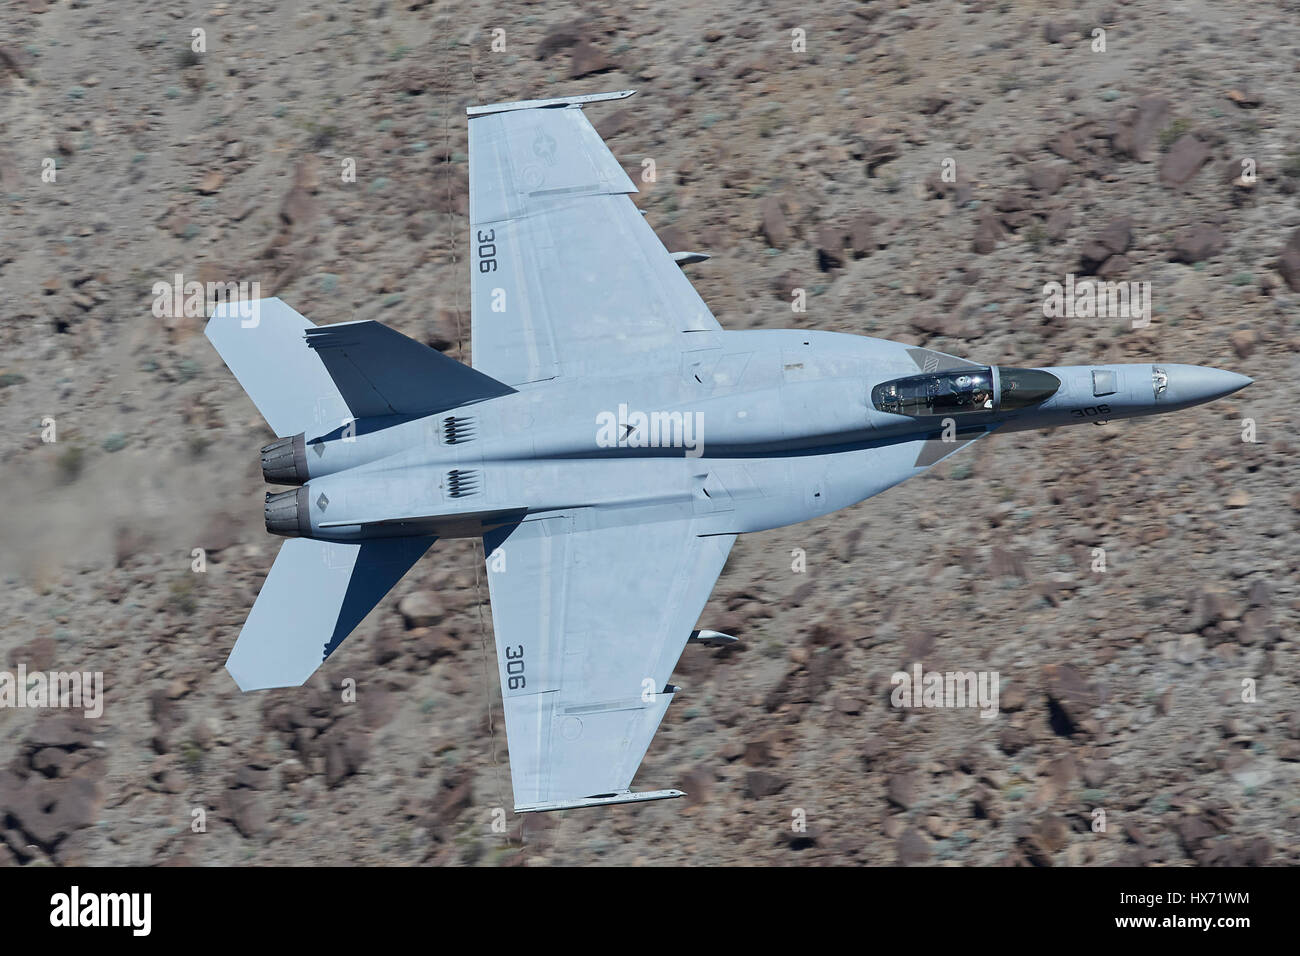 United States Navy F/A-18E Super Hornet Flying At Low Level Through A Desert Canyon. Stock Photo